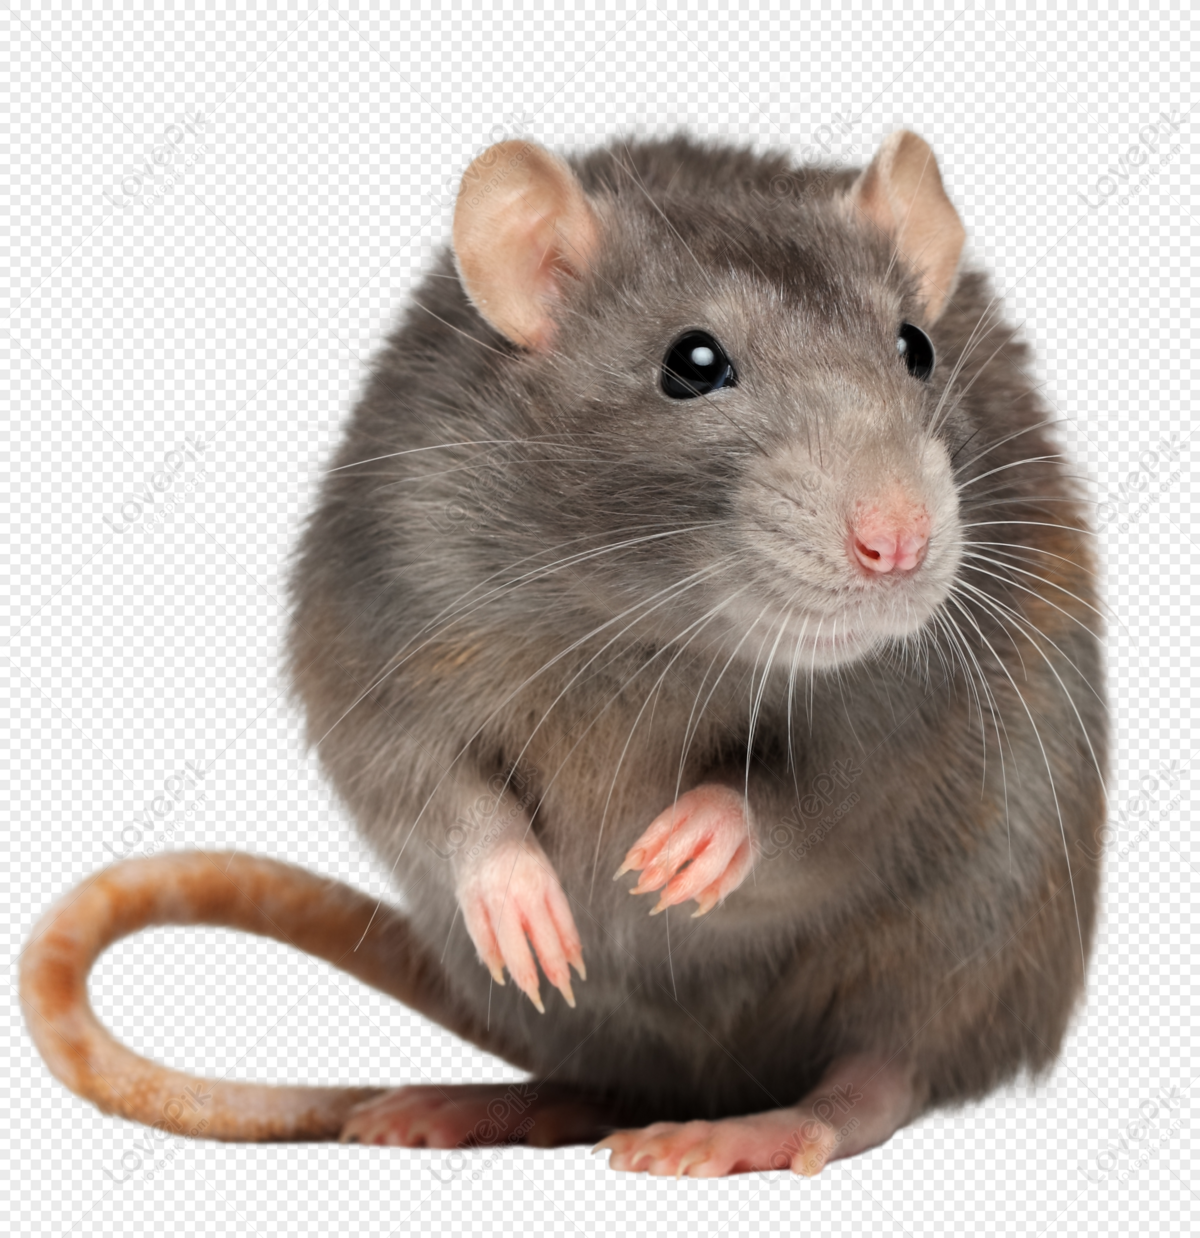 Hd Mouse PNG Hd Transparent Image And Clipart Image For Free ...